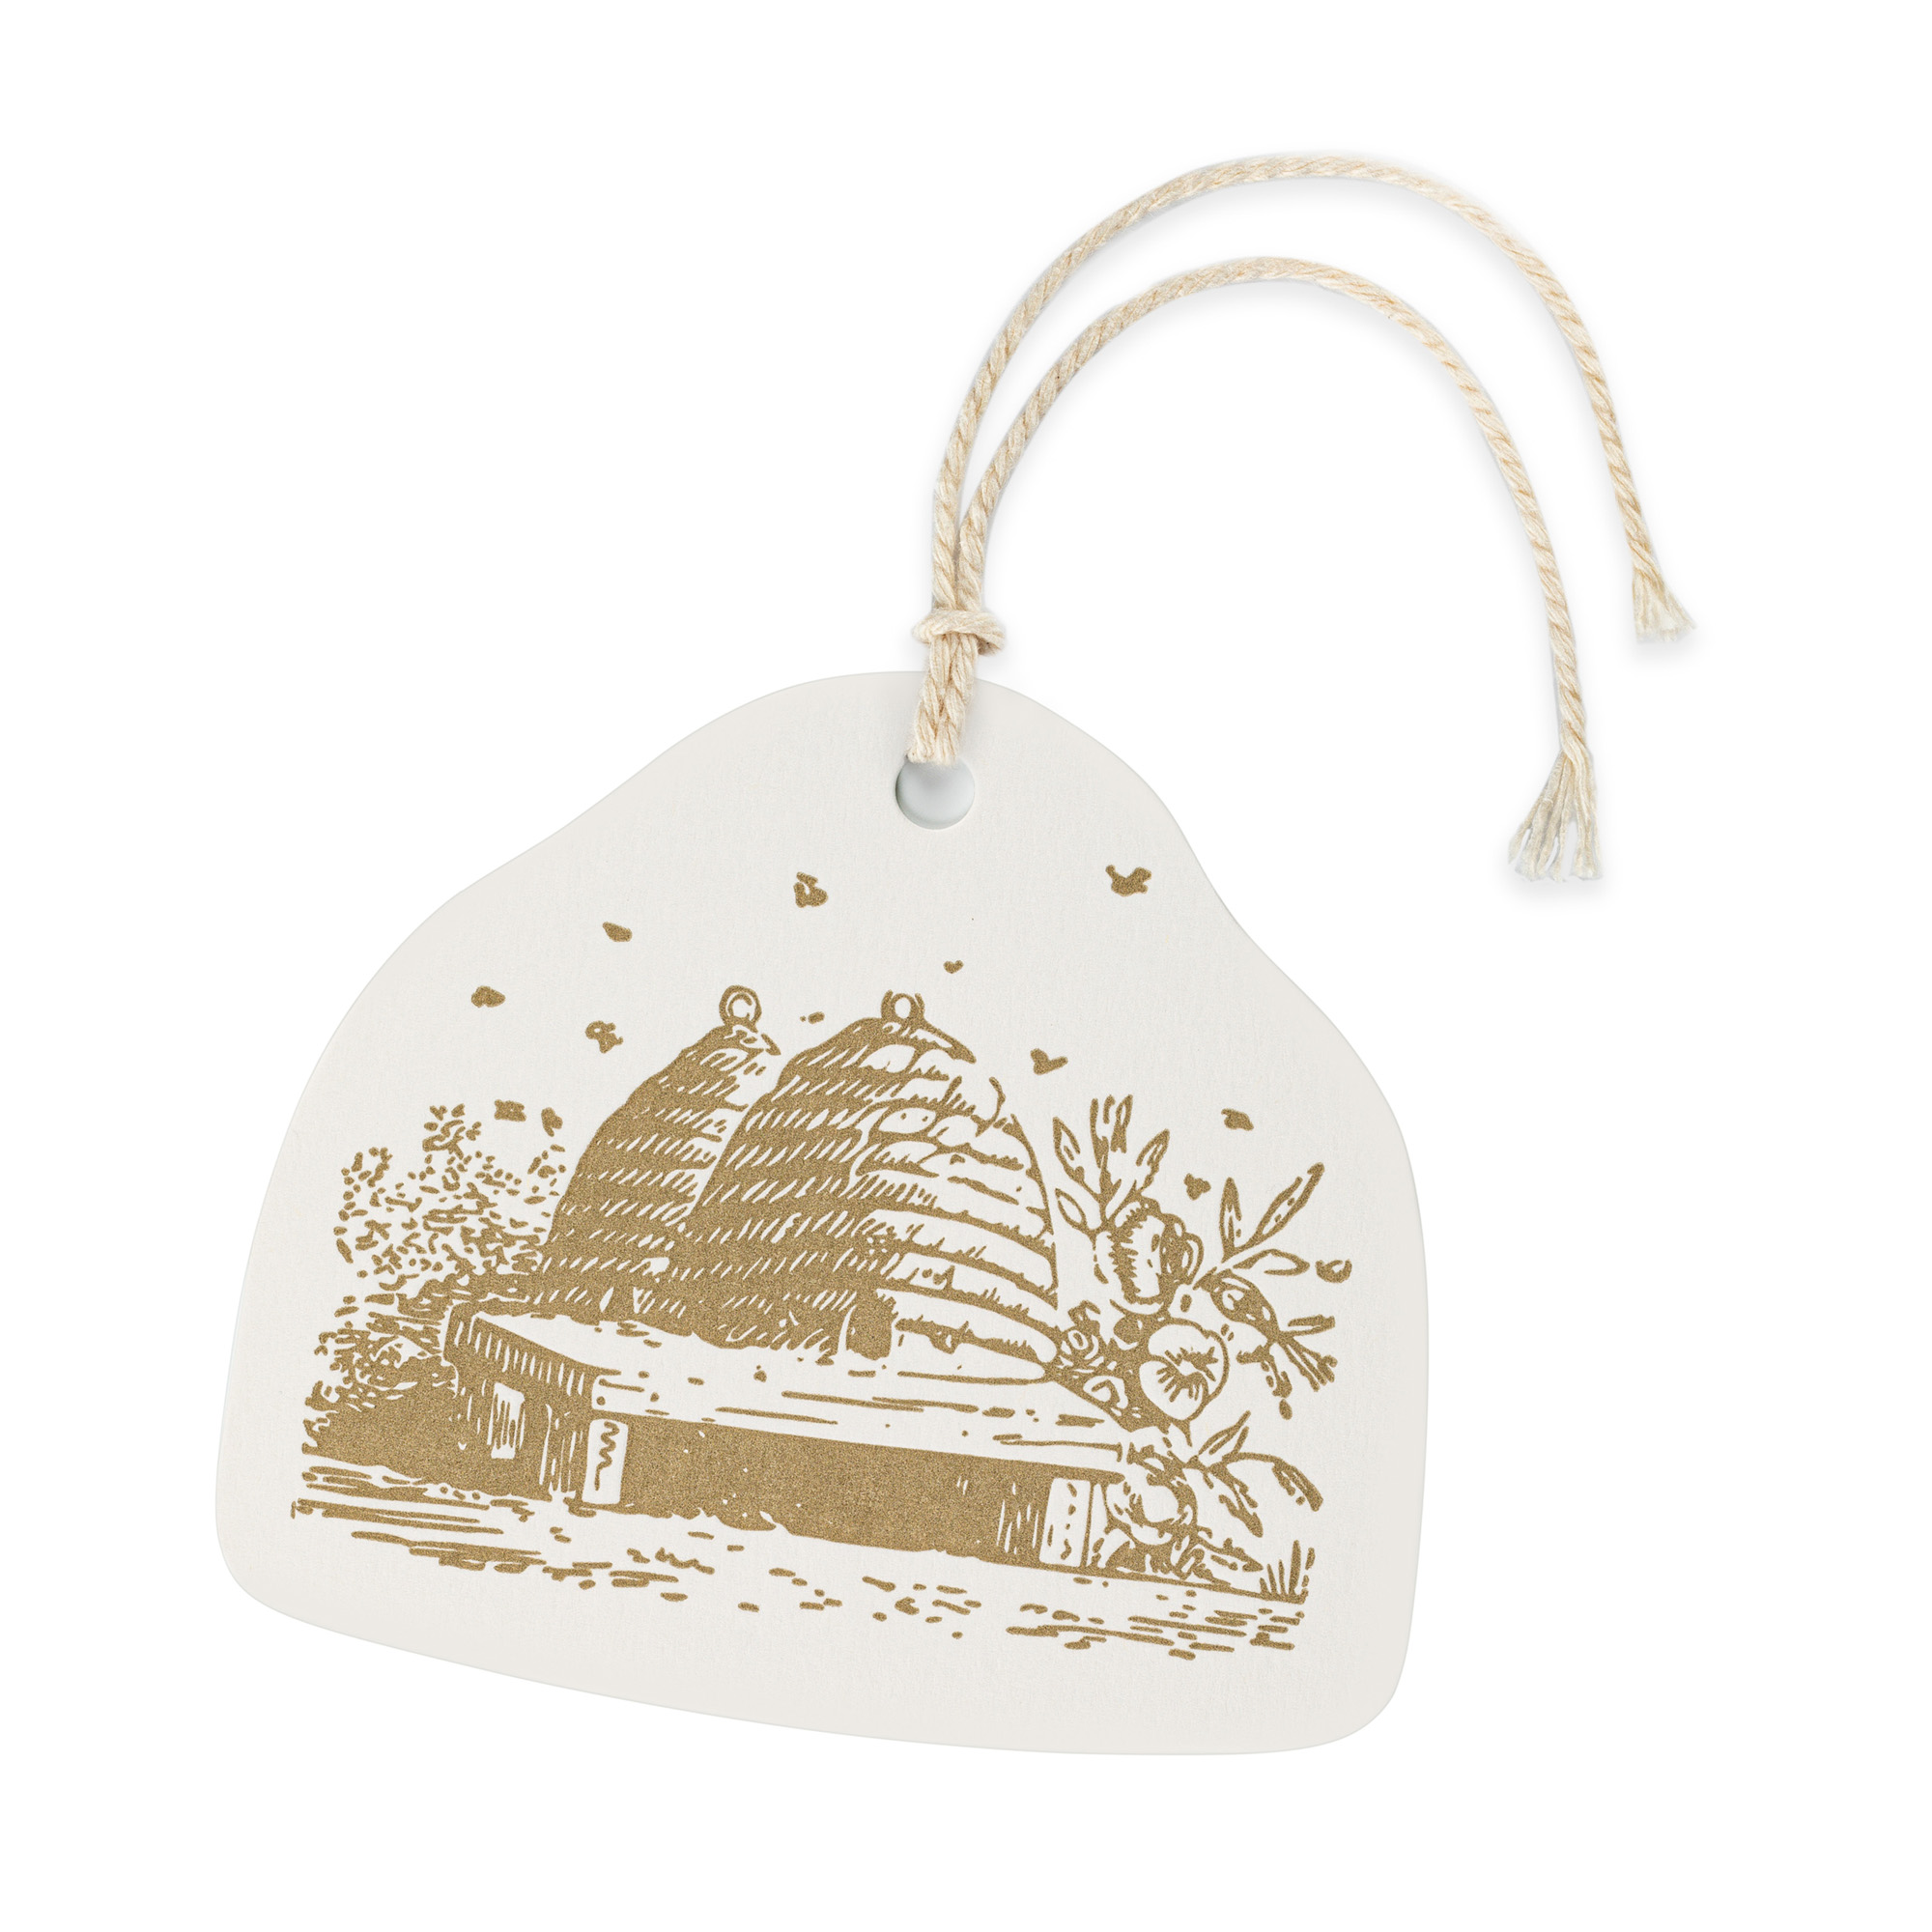 Beehive - Gift tags - Archivist - from Archivist Gallery 